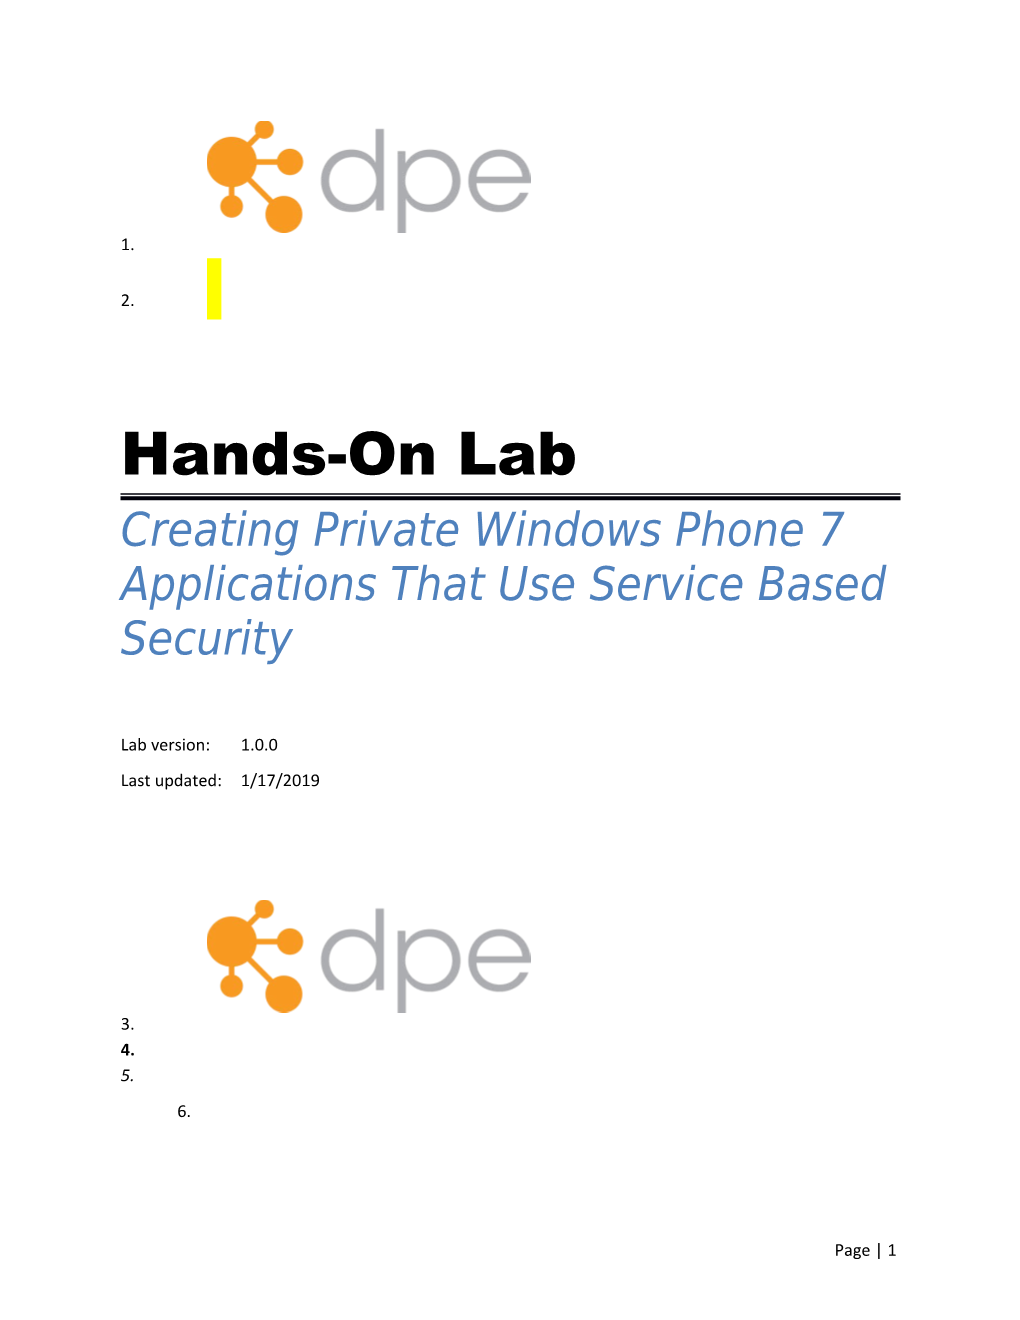 Creating Private Windows Phone 7 Applications That Use Service Based Security